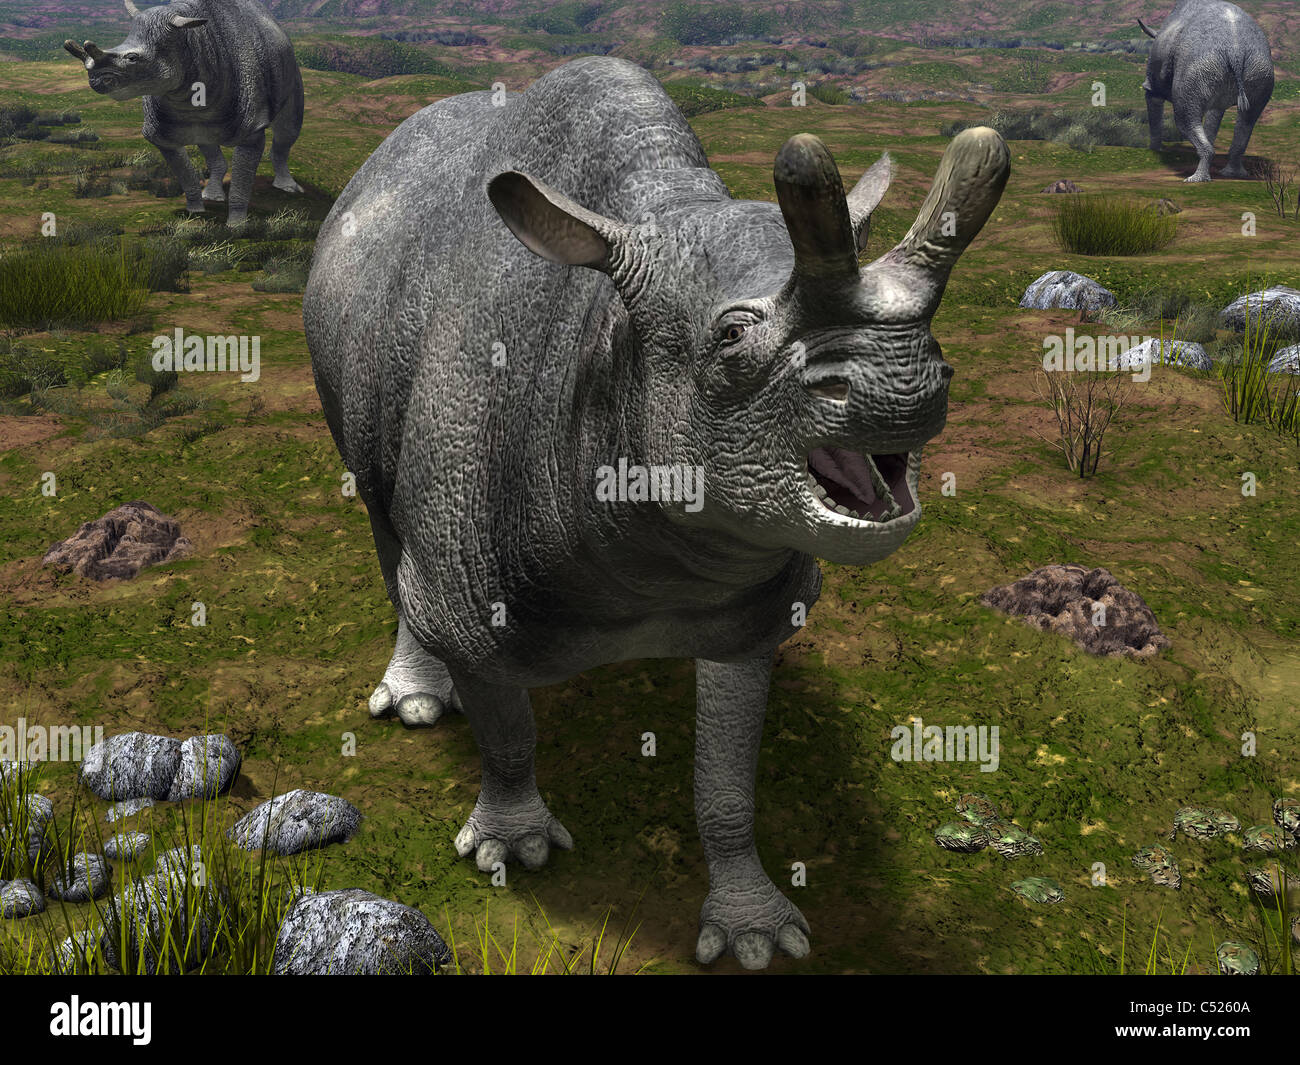 A Brontotherium leaves his forest habitat in search of a meal. Stock Photo